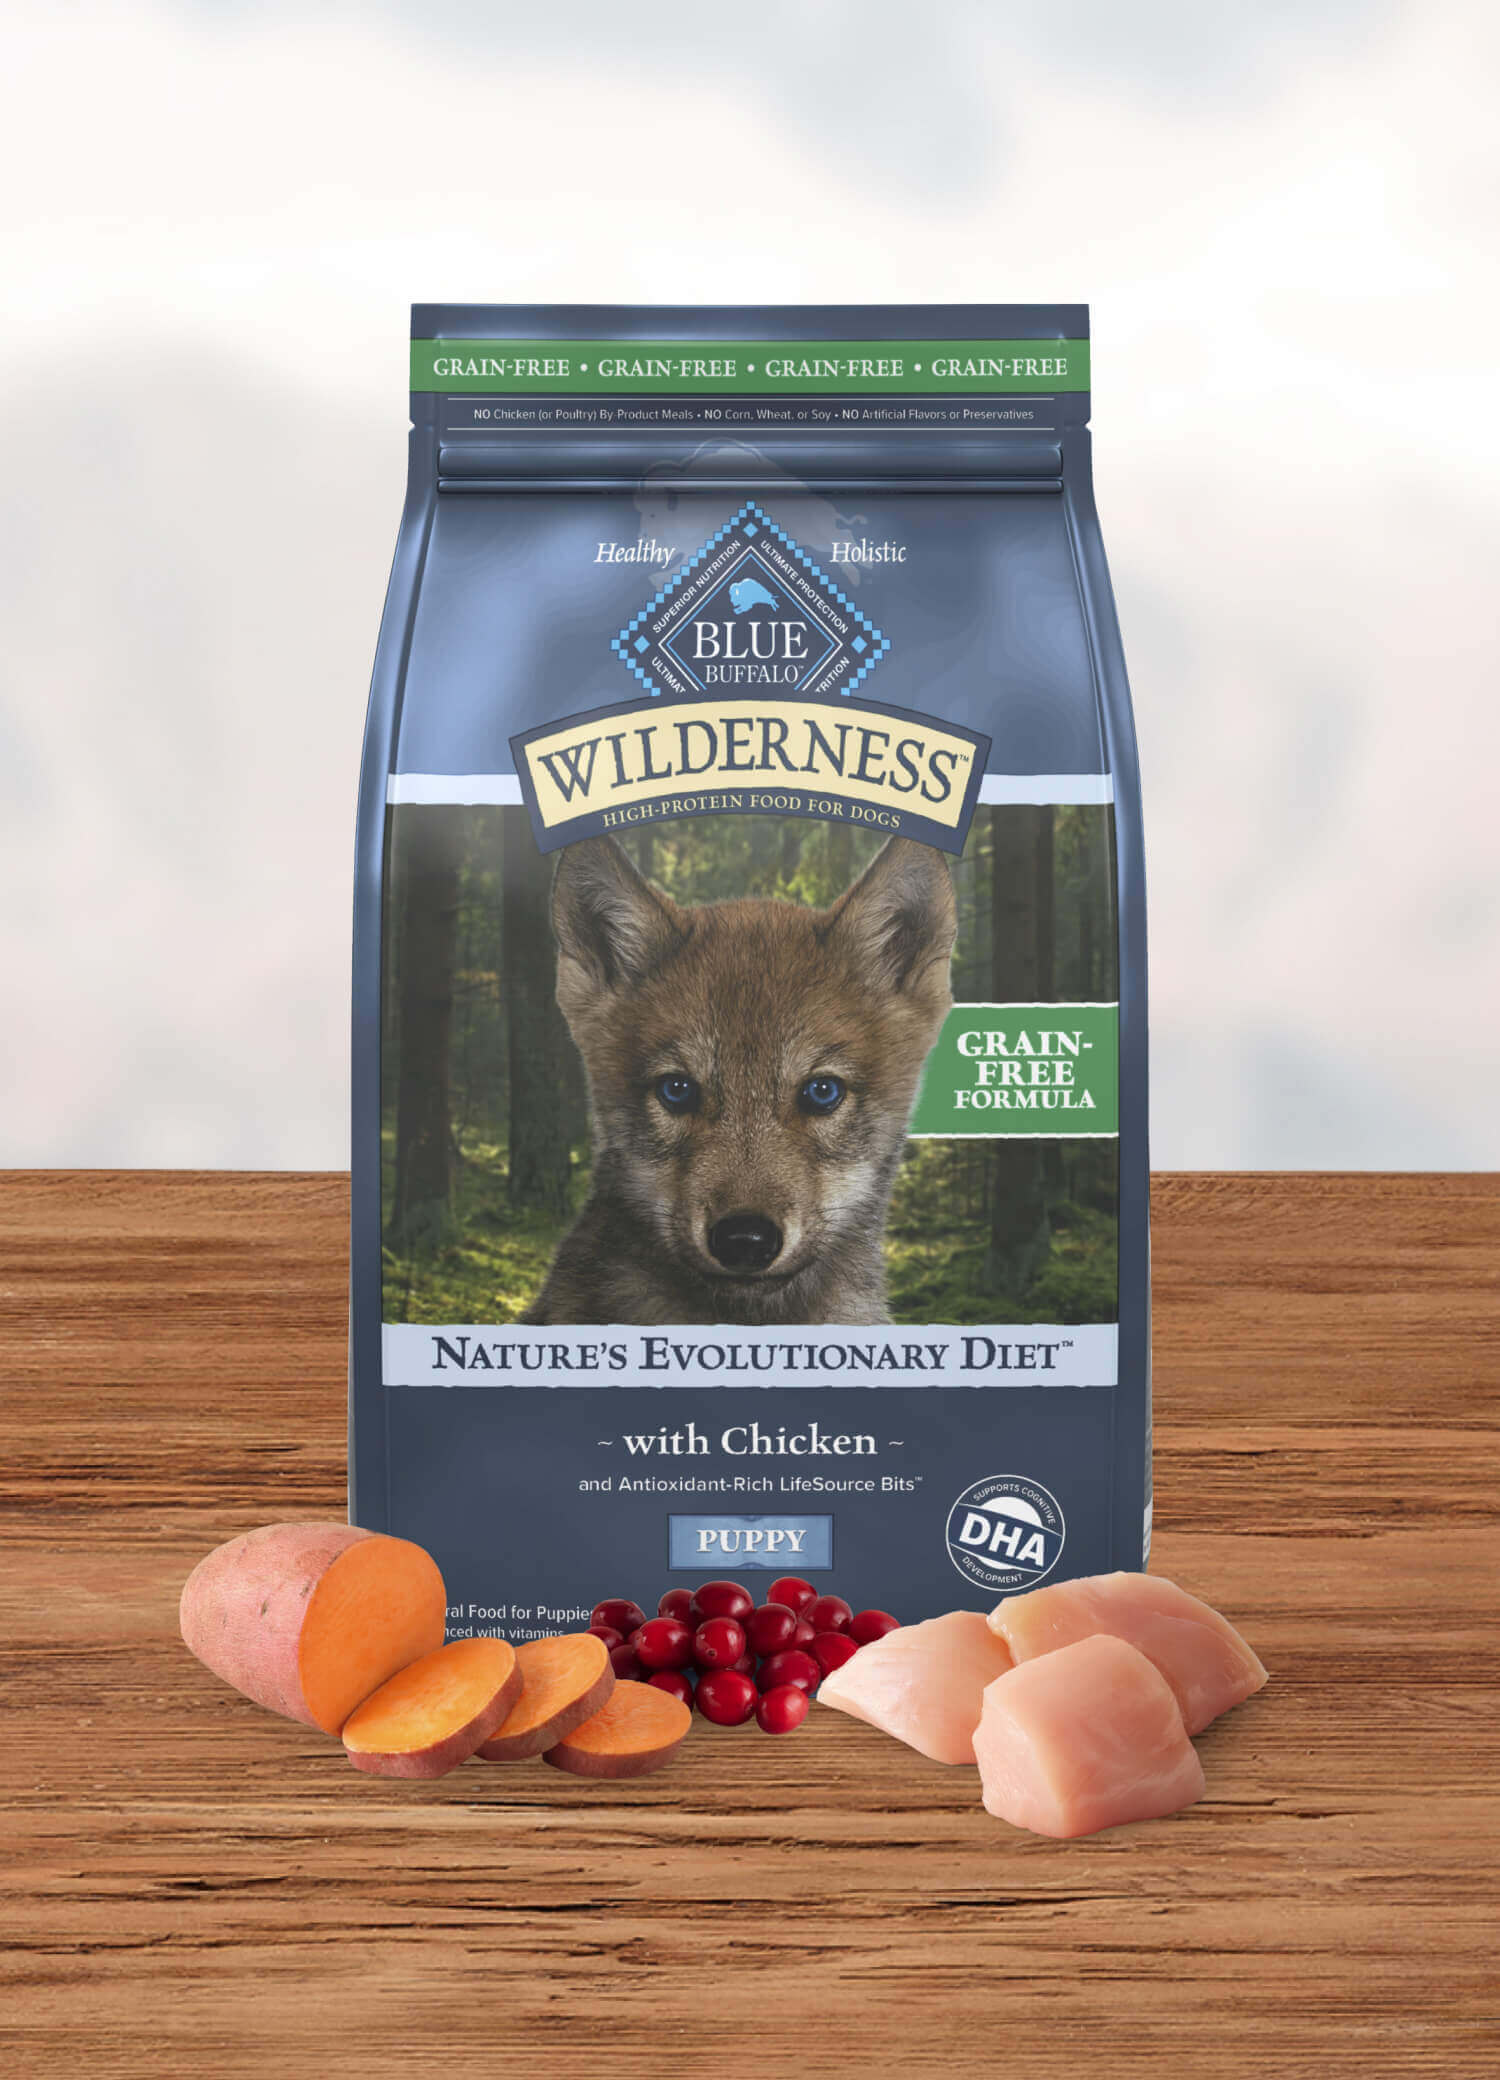 A bag of Wilderness Nature’s Evolutionary Diet with Chicken and LifeSource Bits Puppy – Grain-Free dog dry food